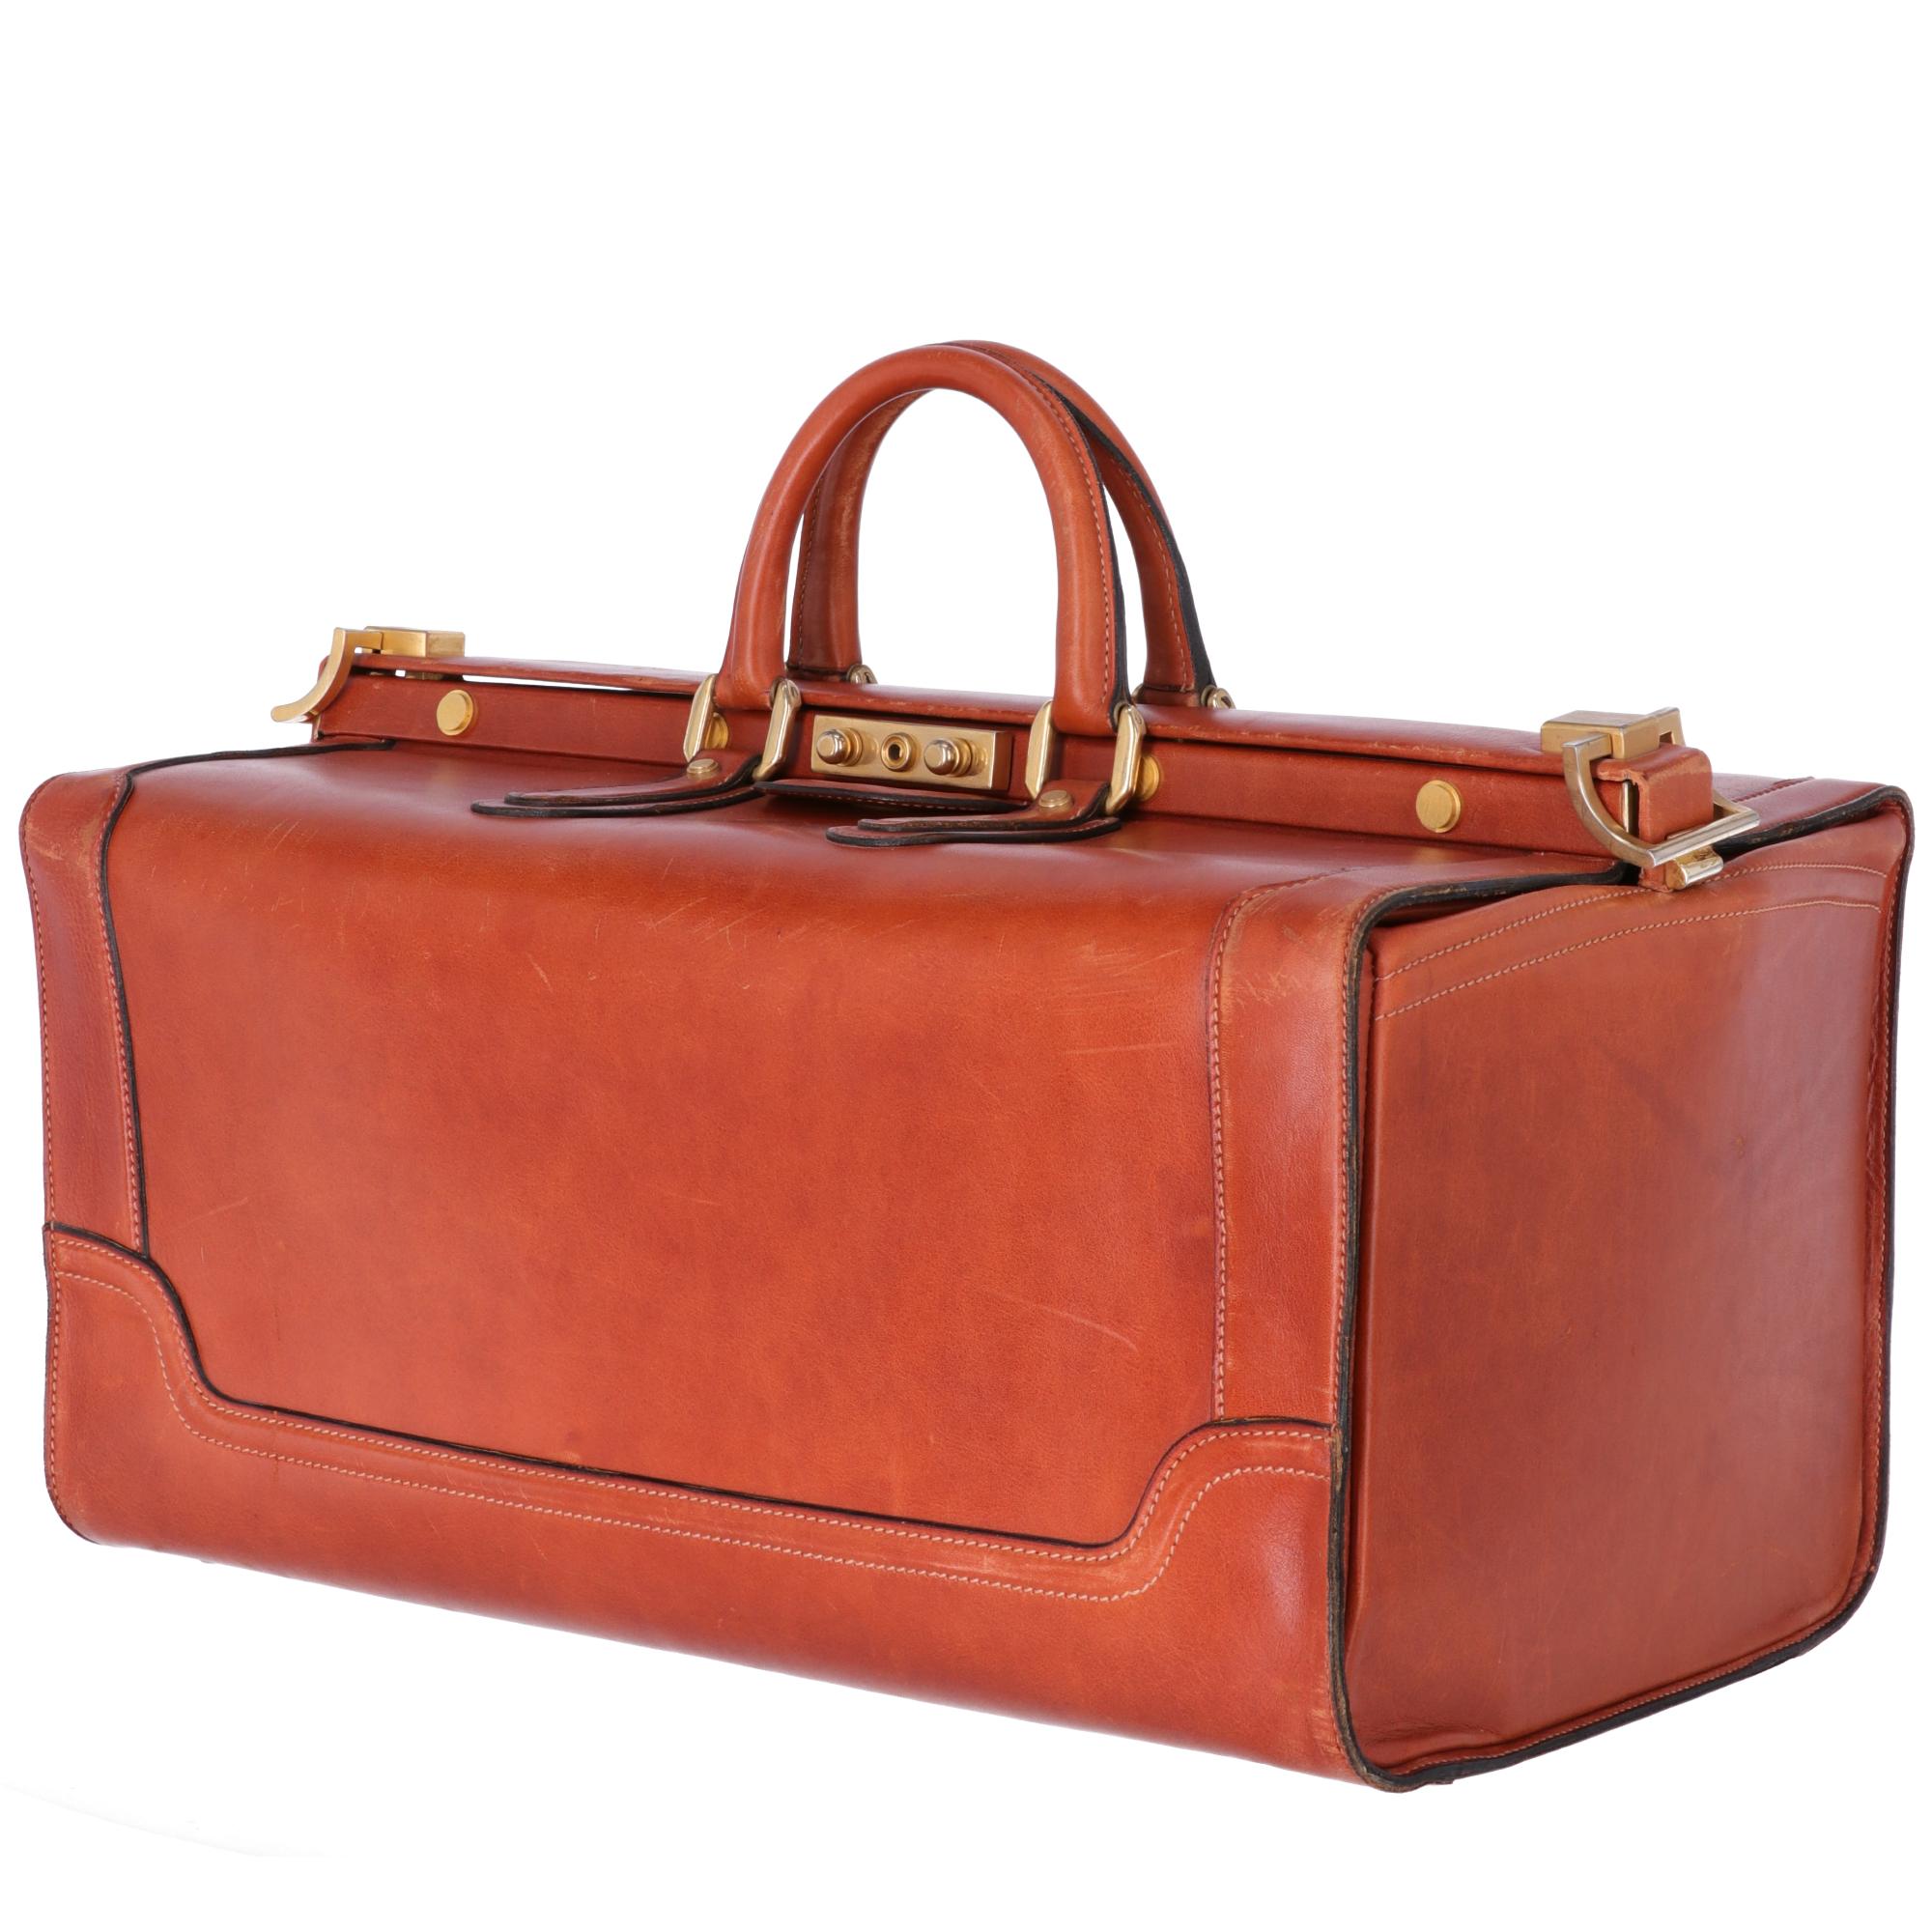 Travel trunk in brown leather, equipped with two rigid leather handles, golden metal snap closure and six feet on the bottom. Inside there are two pockets, one with zip and the other is applied closed by a leather band. Fully lined in beige